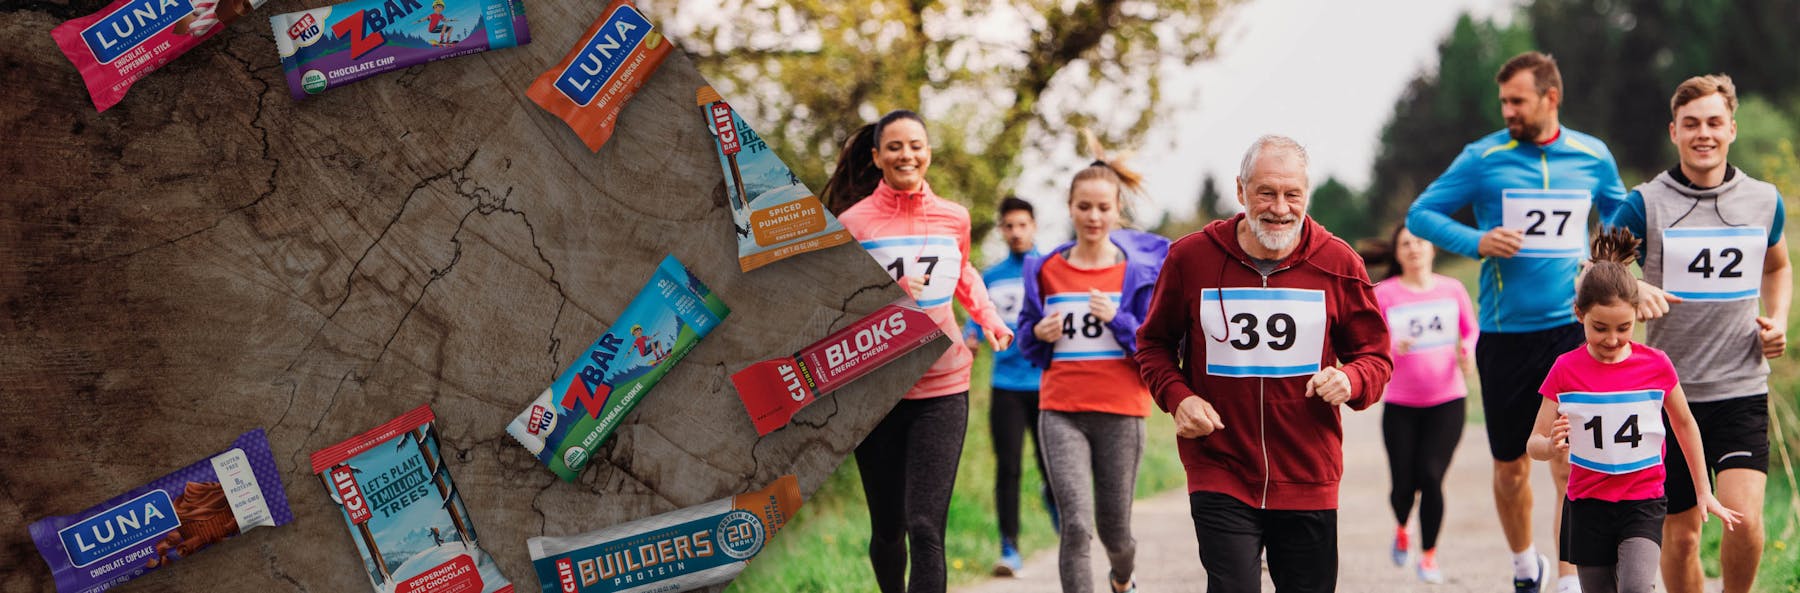 People running race and a variety of CLIF BAR products